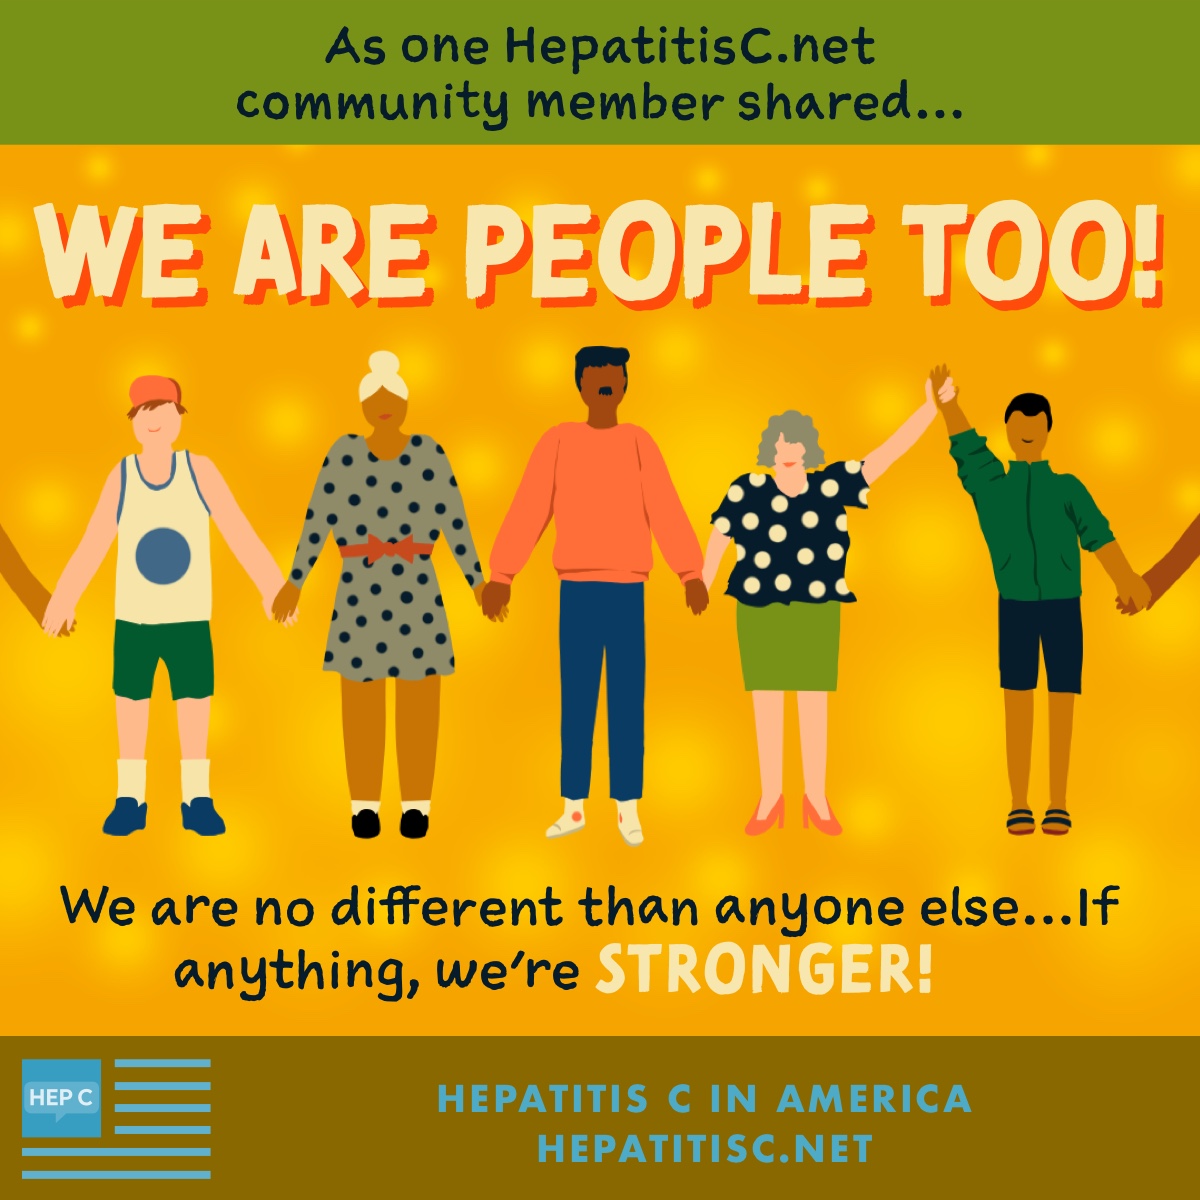 A HepatitisC.net member said, “We are people too! We are no different than anyone else… If anything, we’re stronger!”